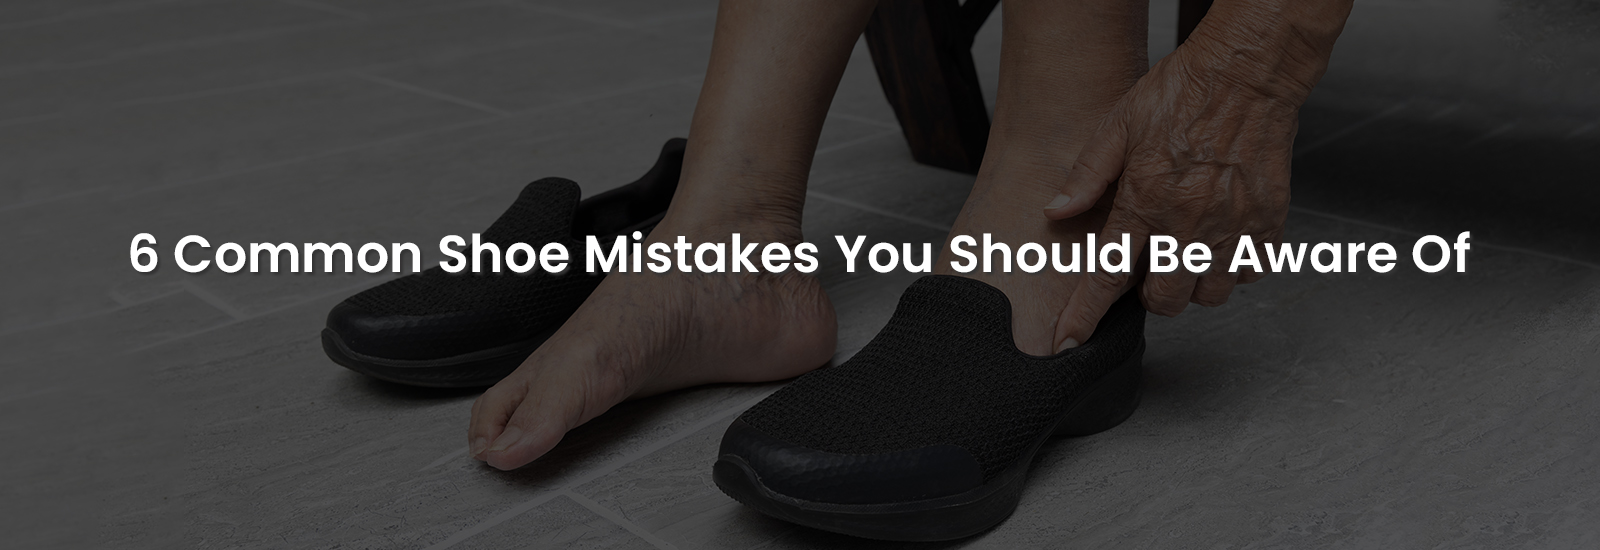 6 Common Shoe Mistakes You Should Be Aware Of | Banner Image